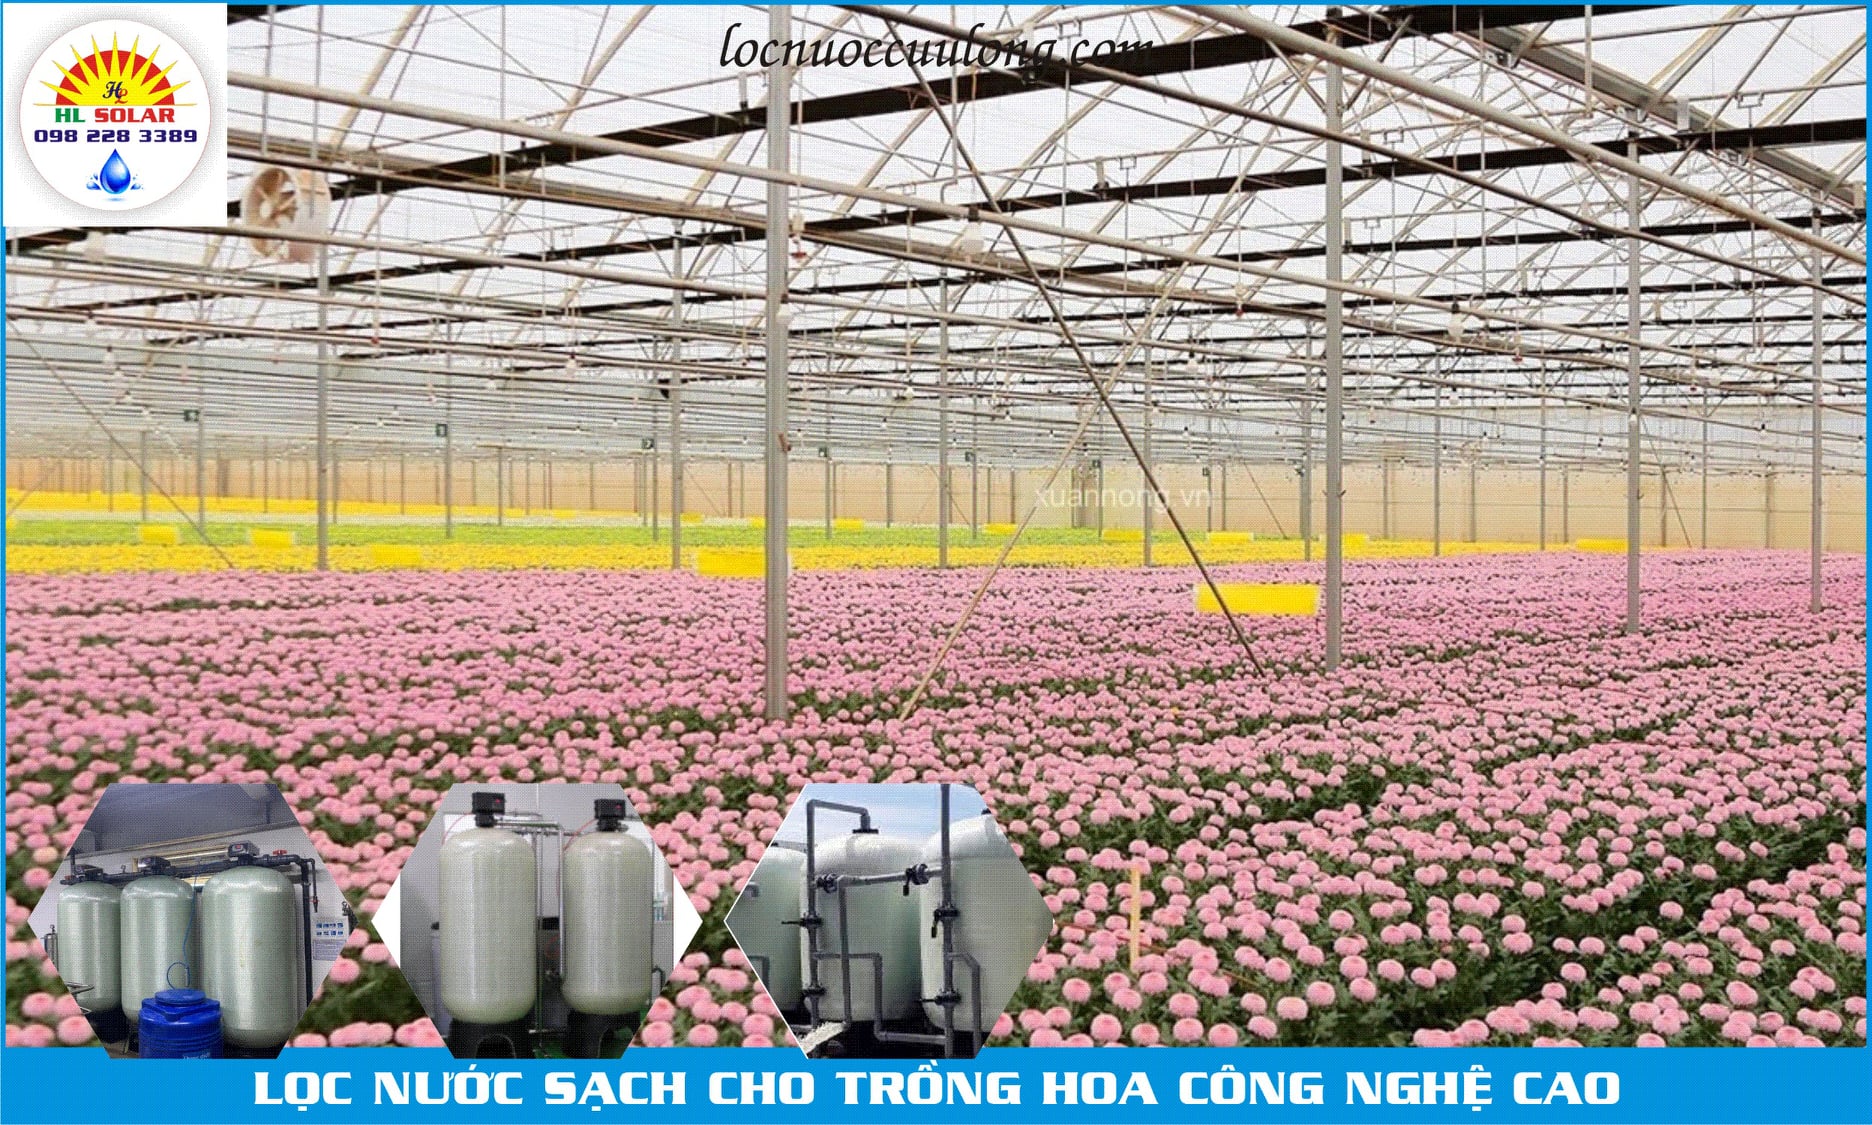 loc_nuoc_sach__cho_trong_hoa_cong_nghe_cao